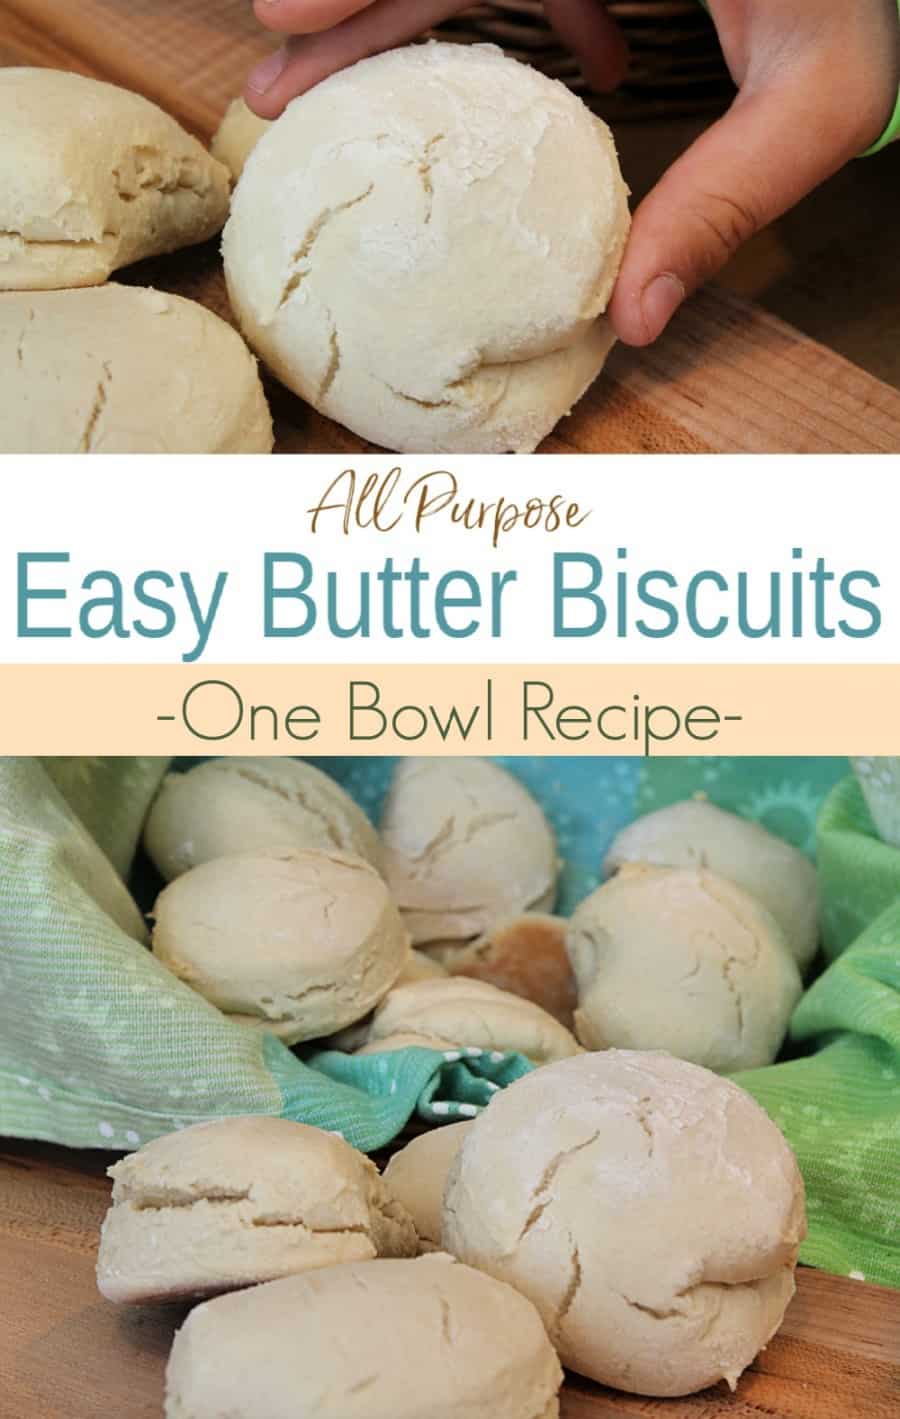 Easy Butter Biscuits Recipe - All Purpose Biscuit Recipe made in just one bowl!